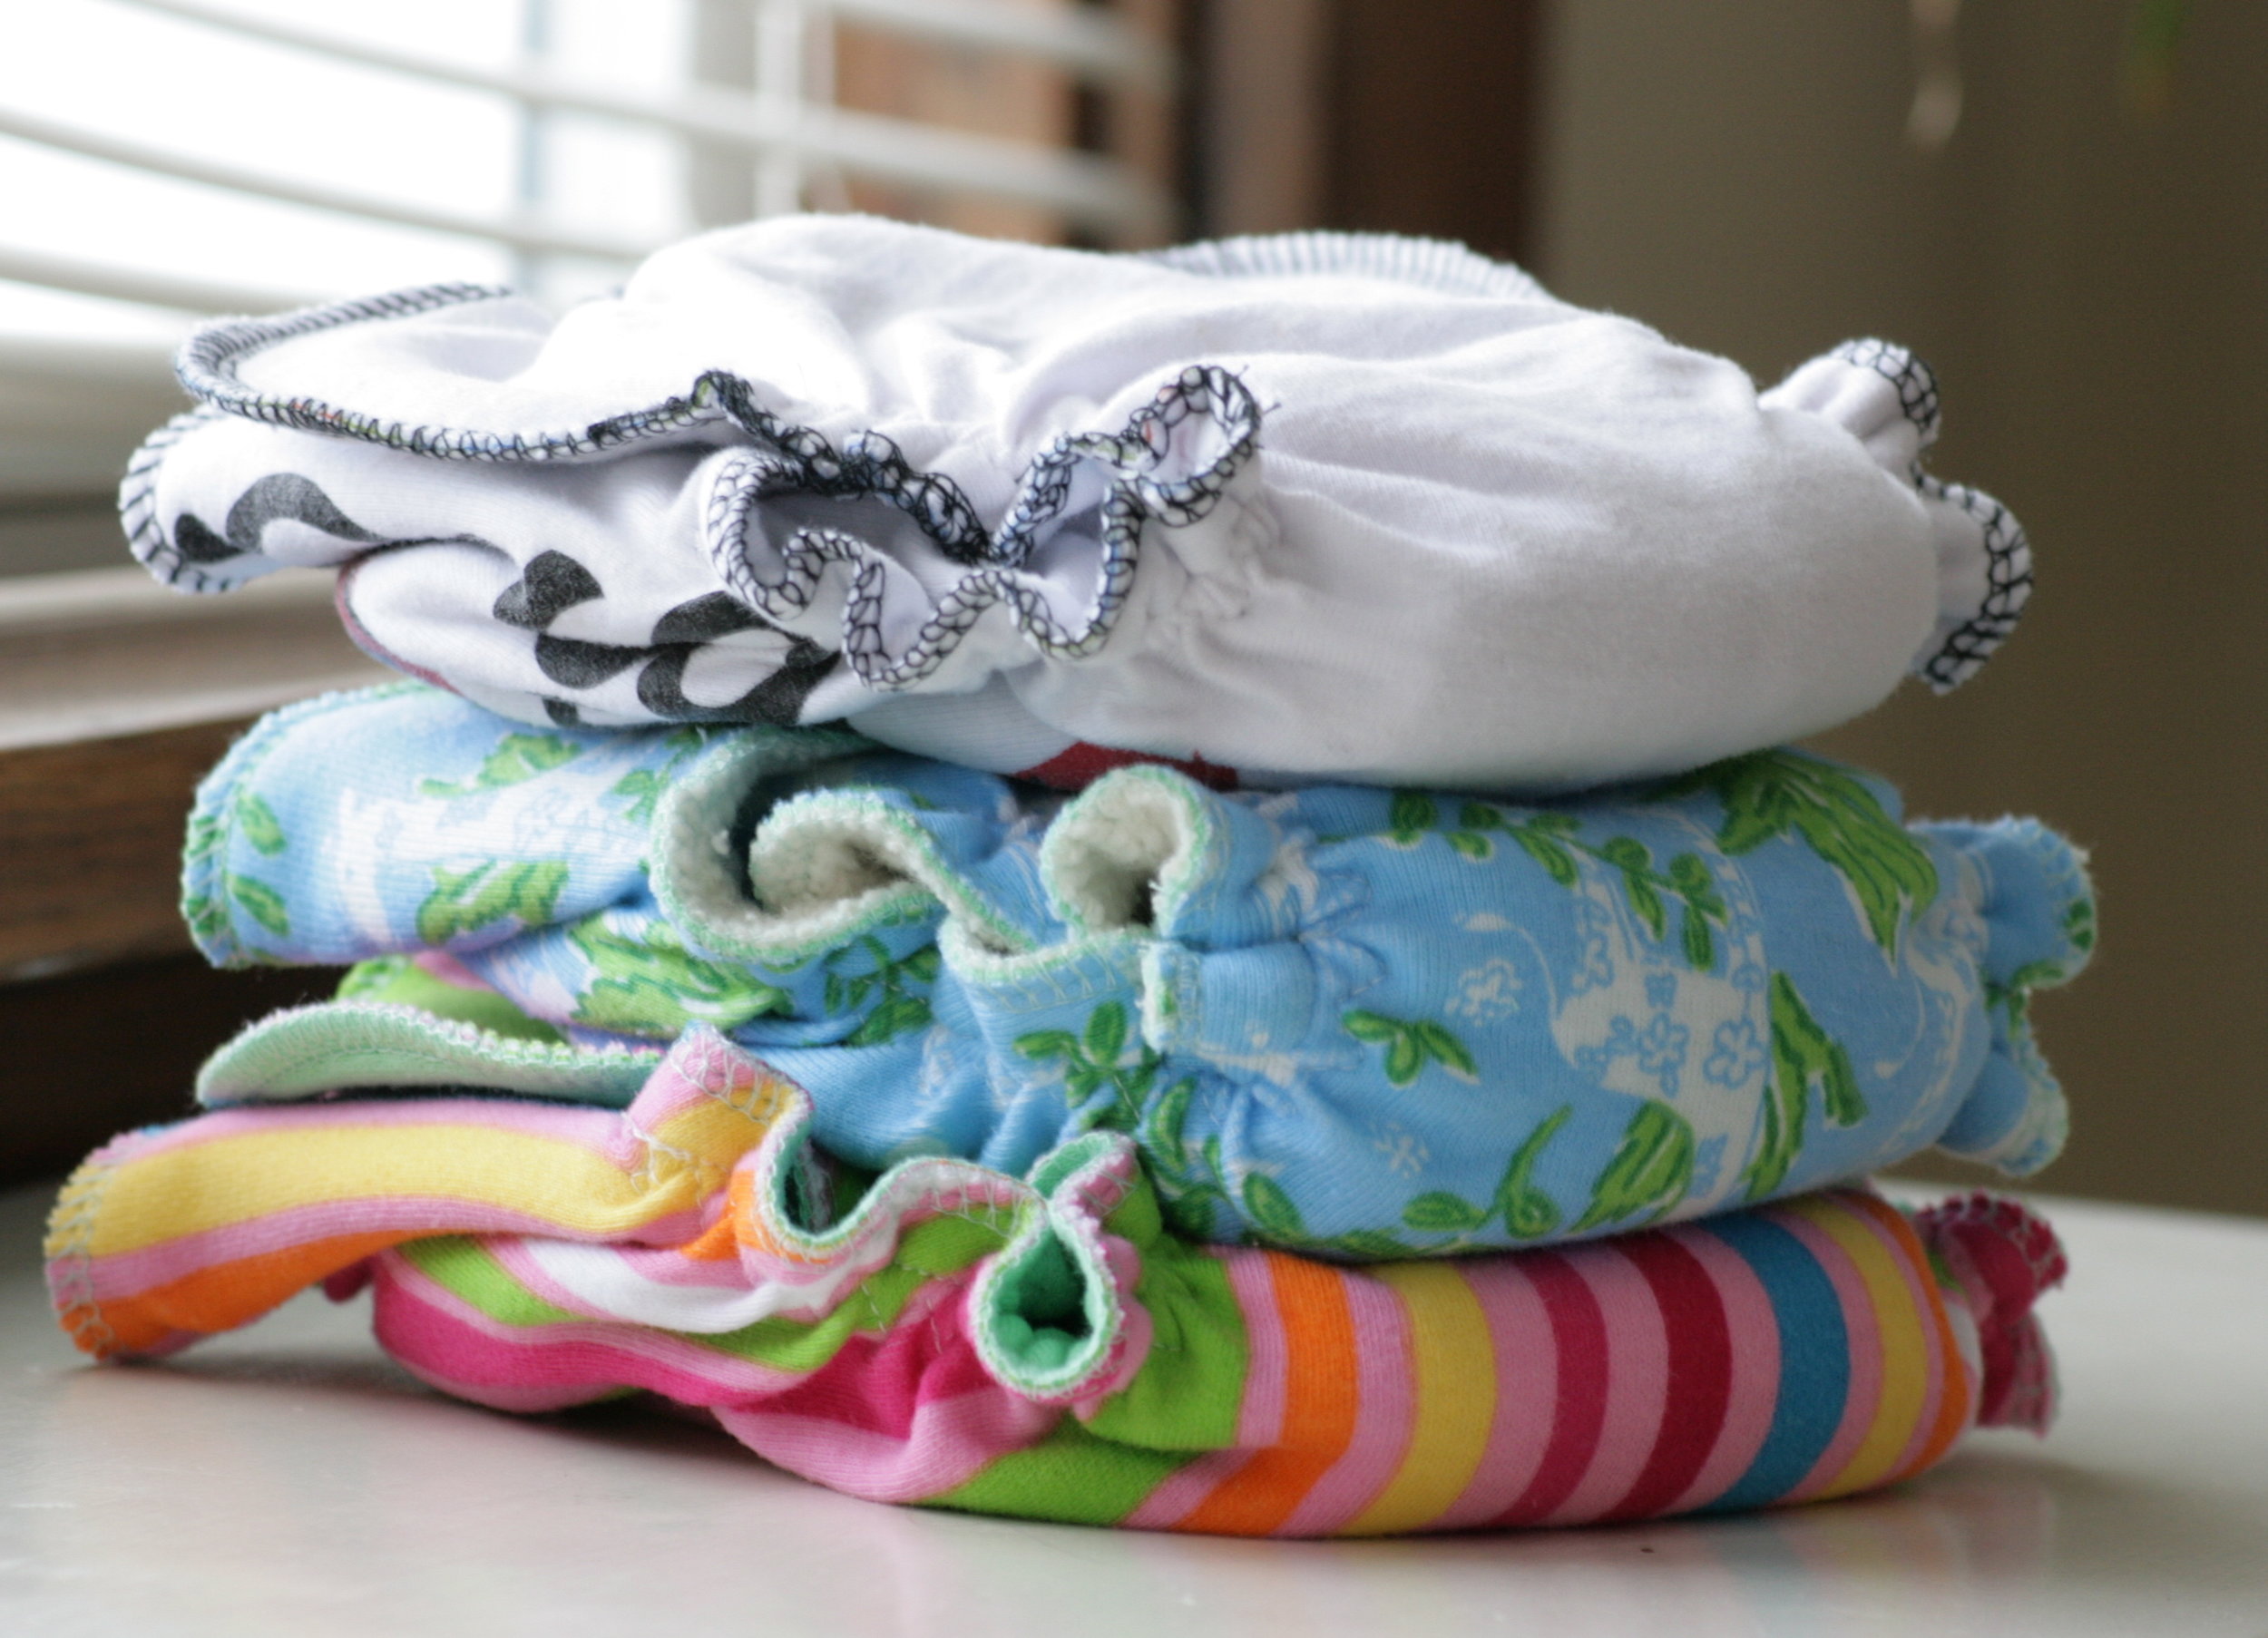 Cloth Diapering 101: A Quick Guide To 